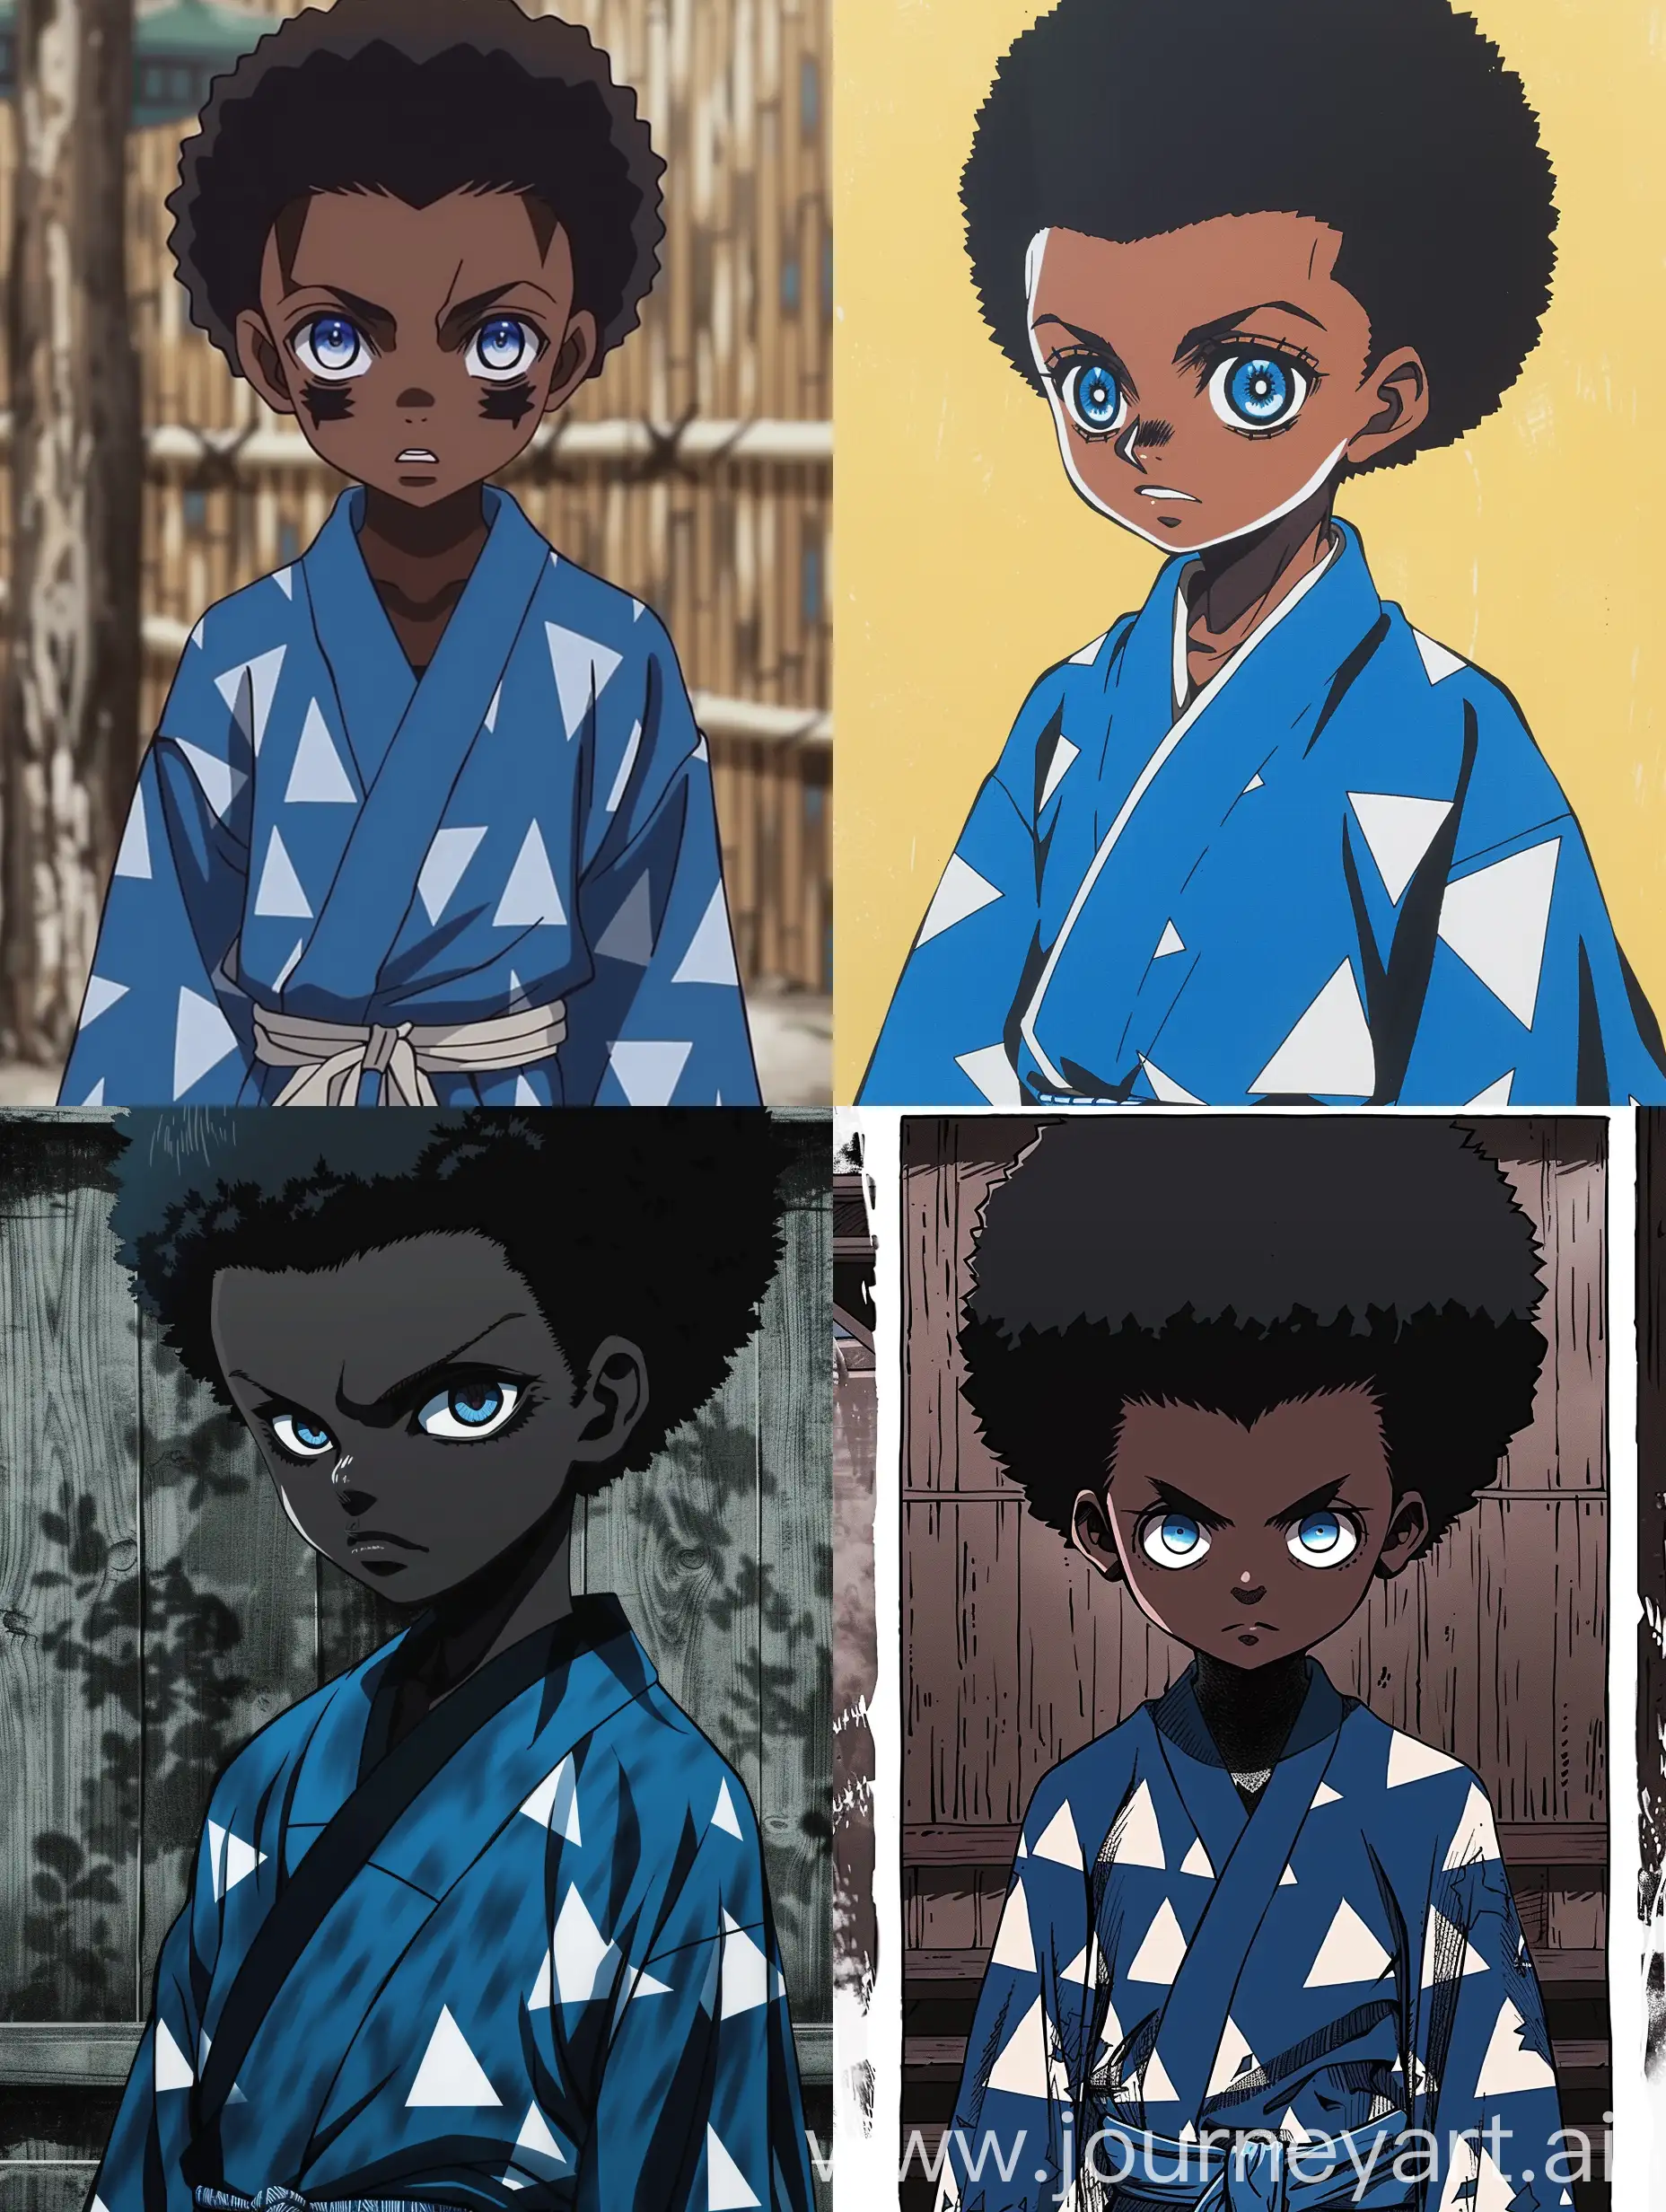 African-American-Boy-in-Blue-Haori-with-Triangle-Patterns